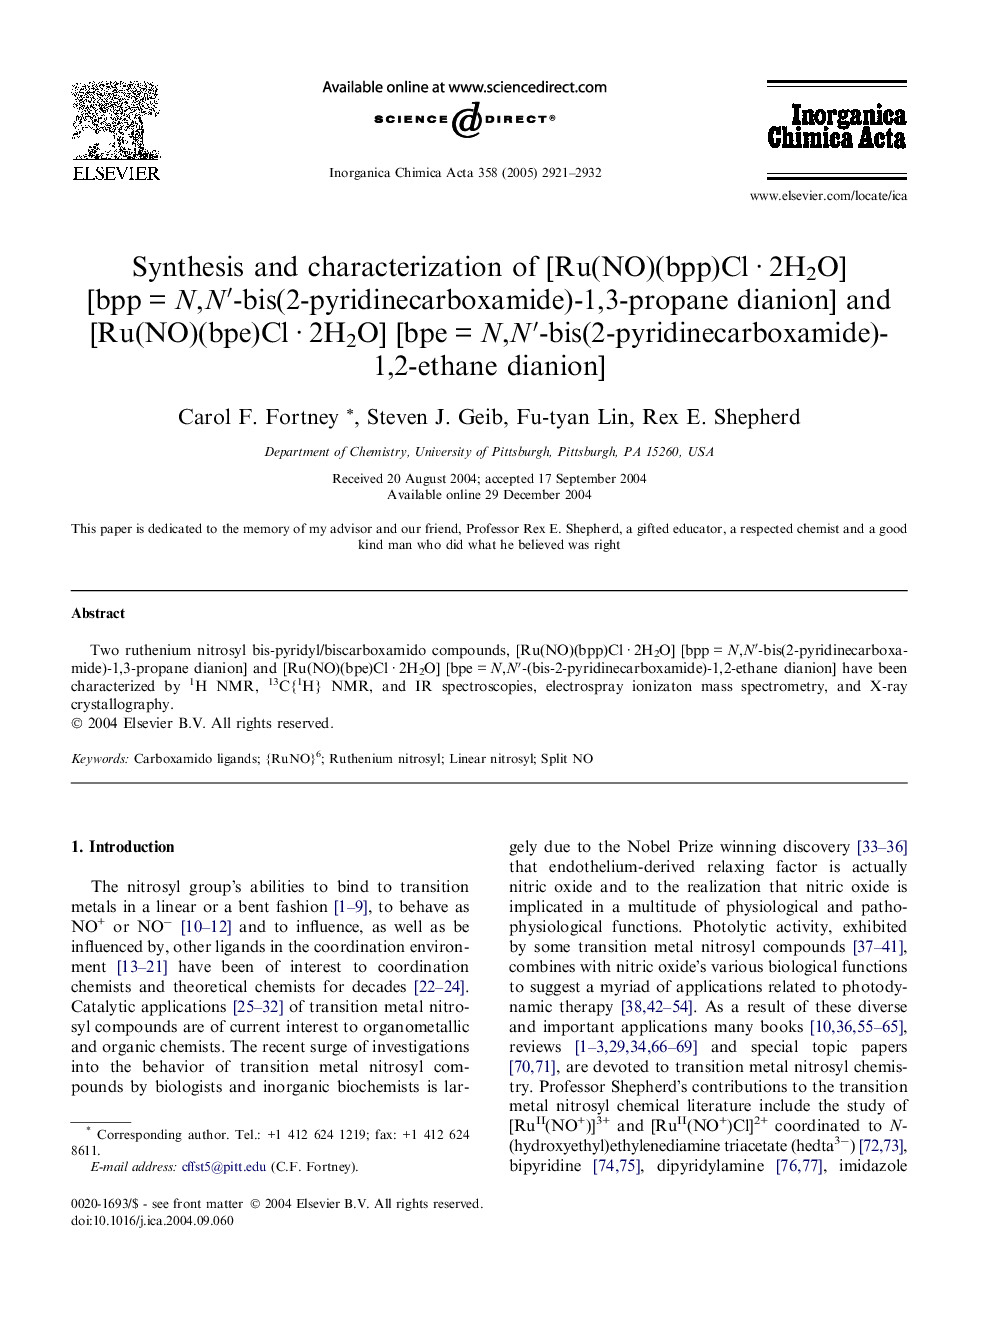 Synthesis and characterization of [Ru(NO)(bpp)Cl · 2H2O] [bpp = N,N′-bis(2-pyridinecarboxamide)-1,3-propane dianion] and [Ru(NO)(bpe)Cl · 2H2O] [bpe = N,N′-bis(2-pyridinecarboxamide)-1,2-ethane dianion]